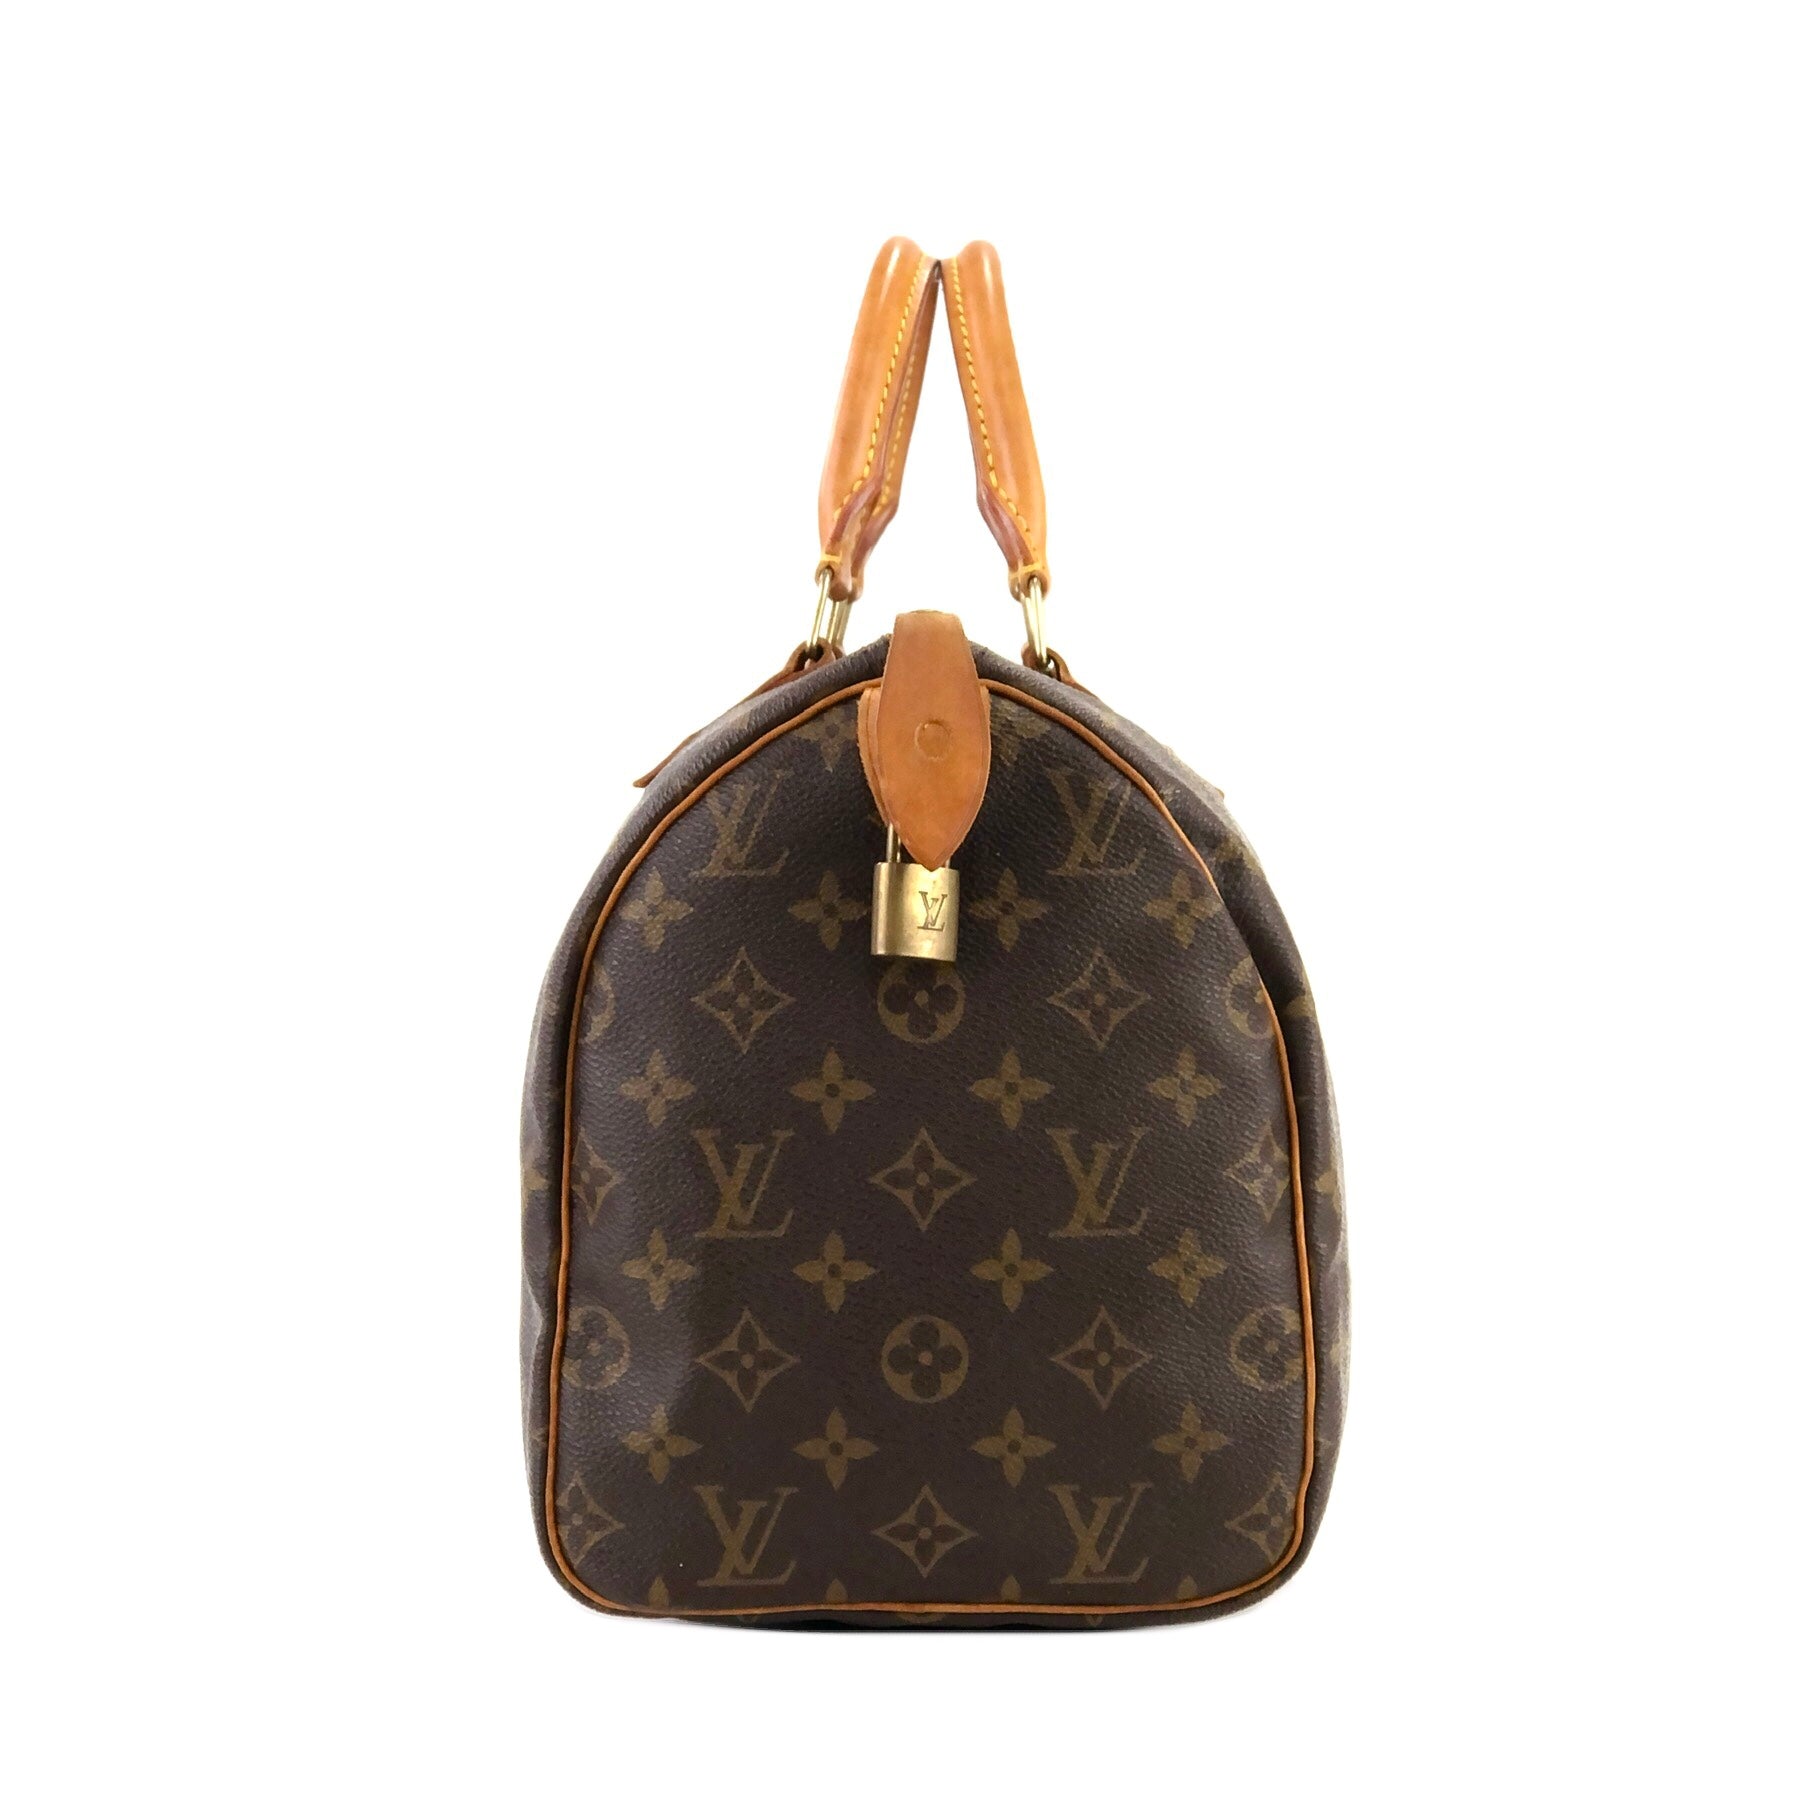 Buy [Used] LOUIS VUITTON Speedy 30 Boston Bag Monogram M41526 from Japan -  Buy authentic Plus exclusive items from Japan